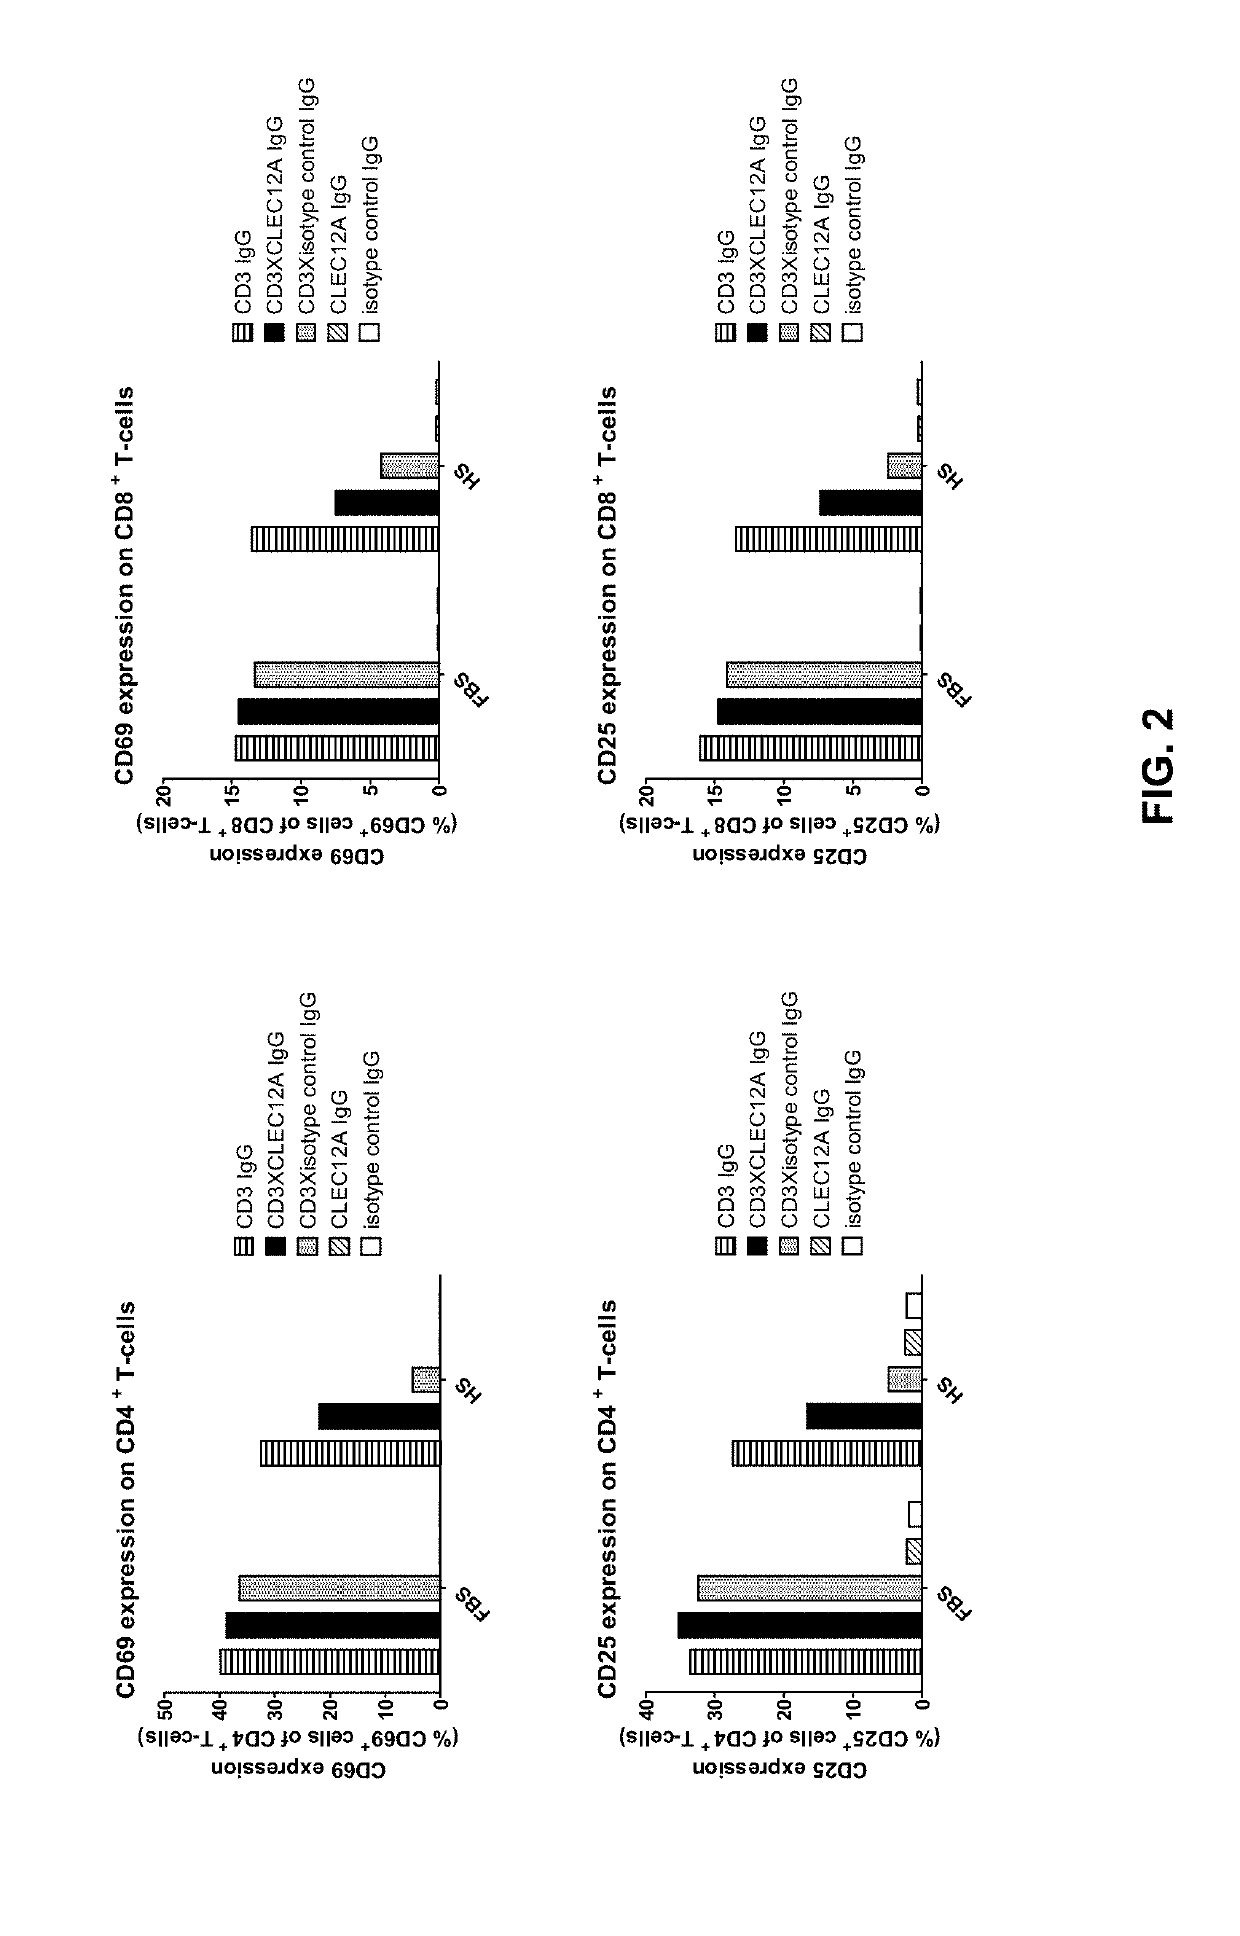 Bispecific IgG antibodies as T cell engagers